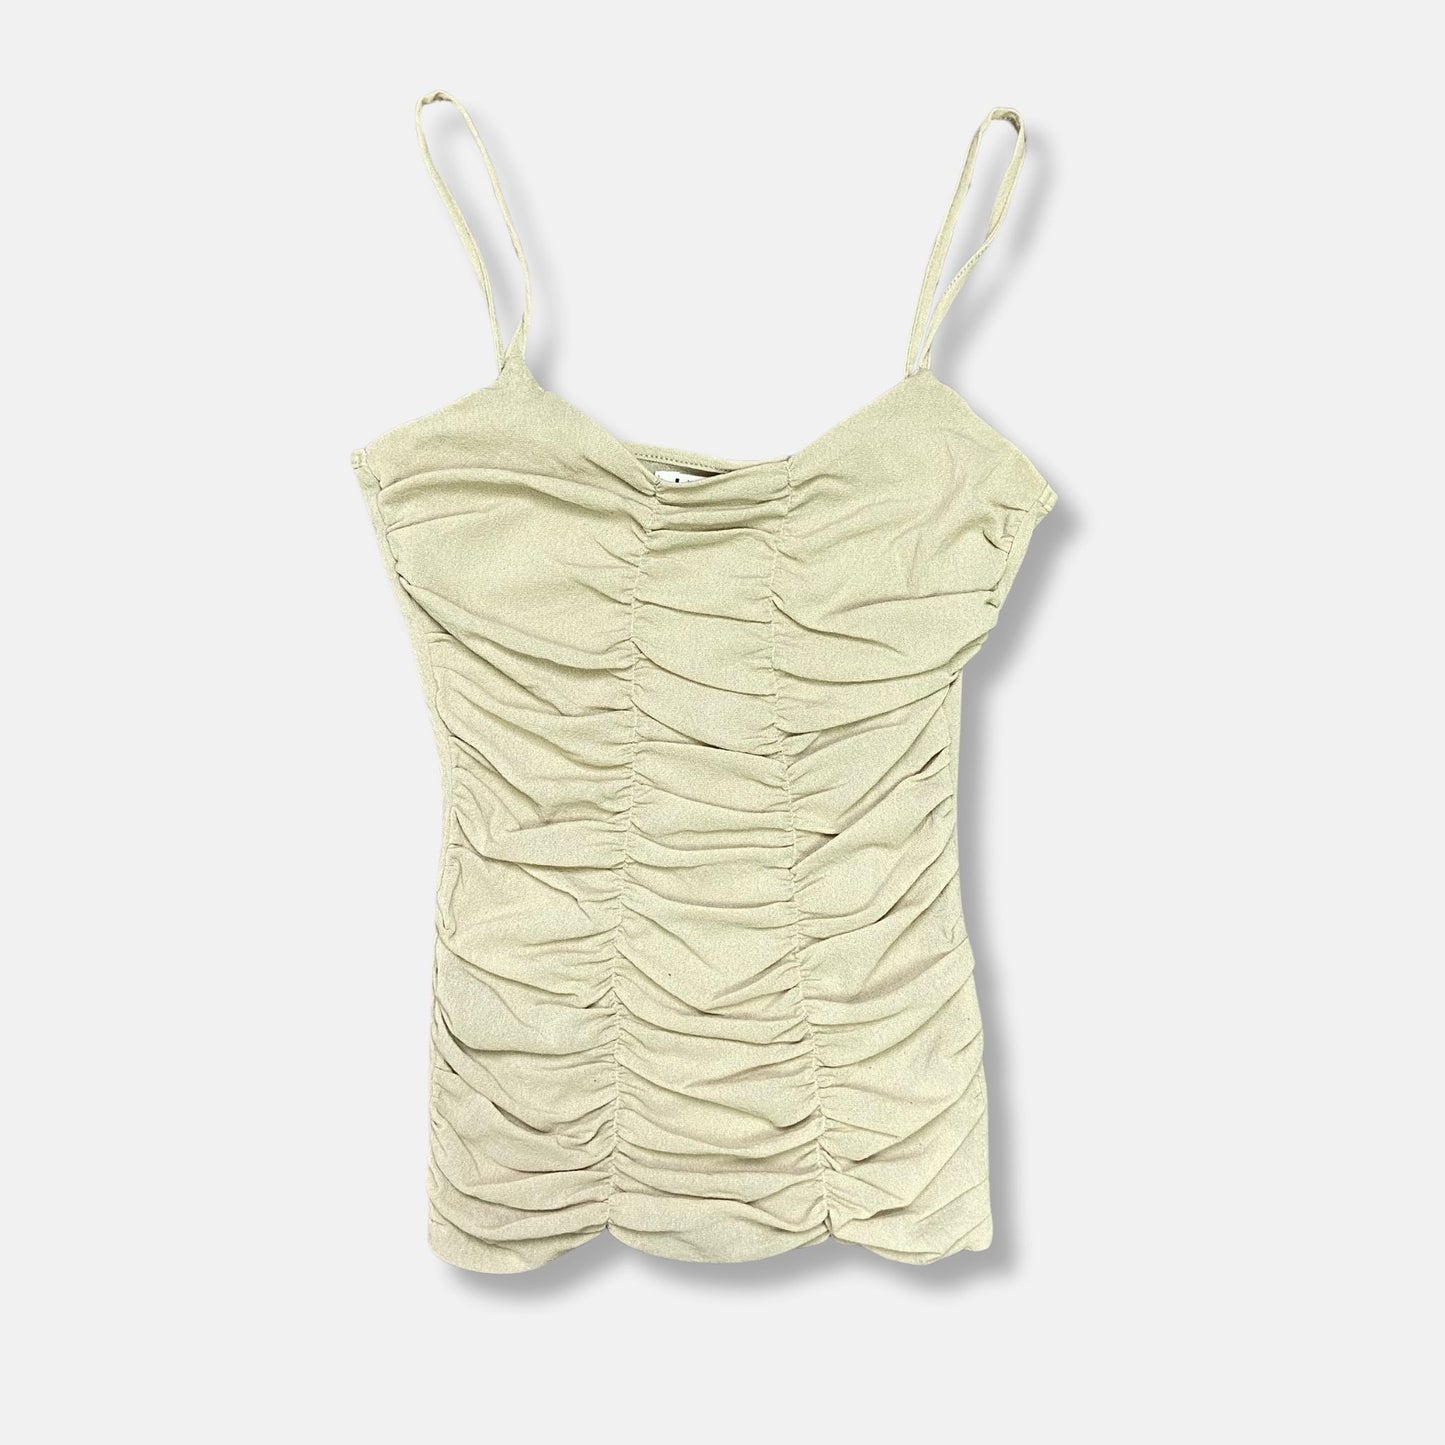 00s Ruched Mesh Cami - Size XS/S - Funky Cat